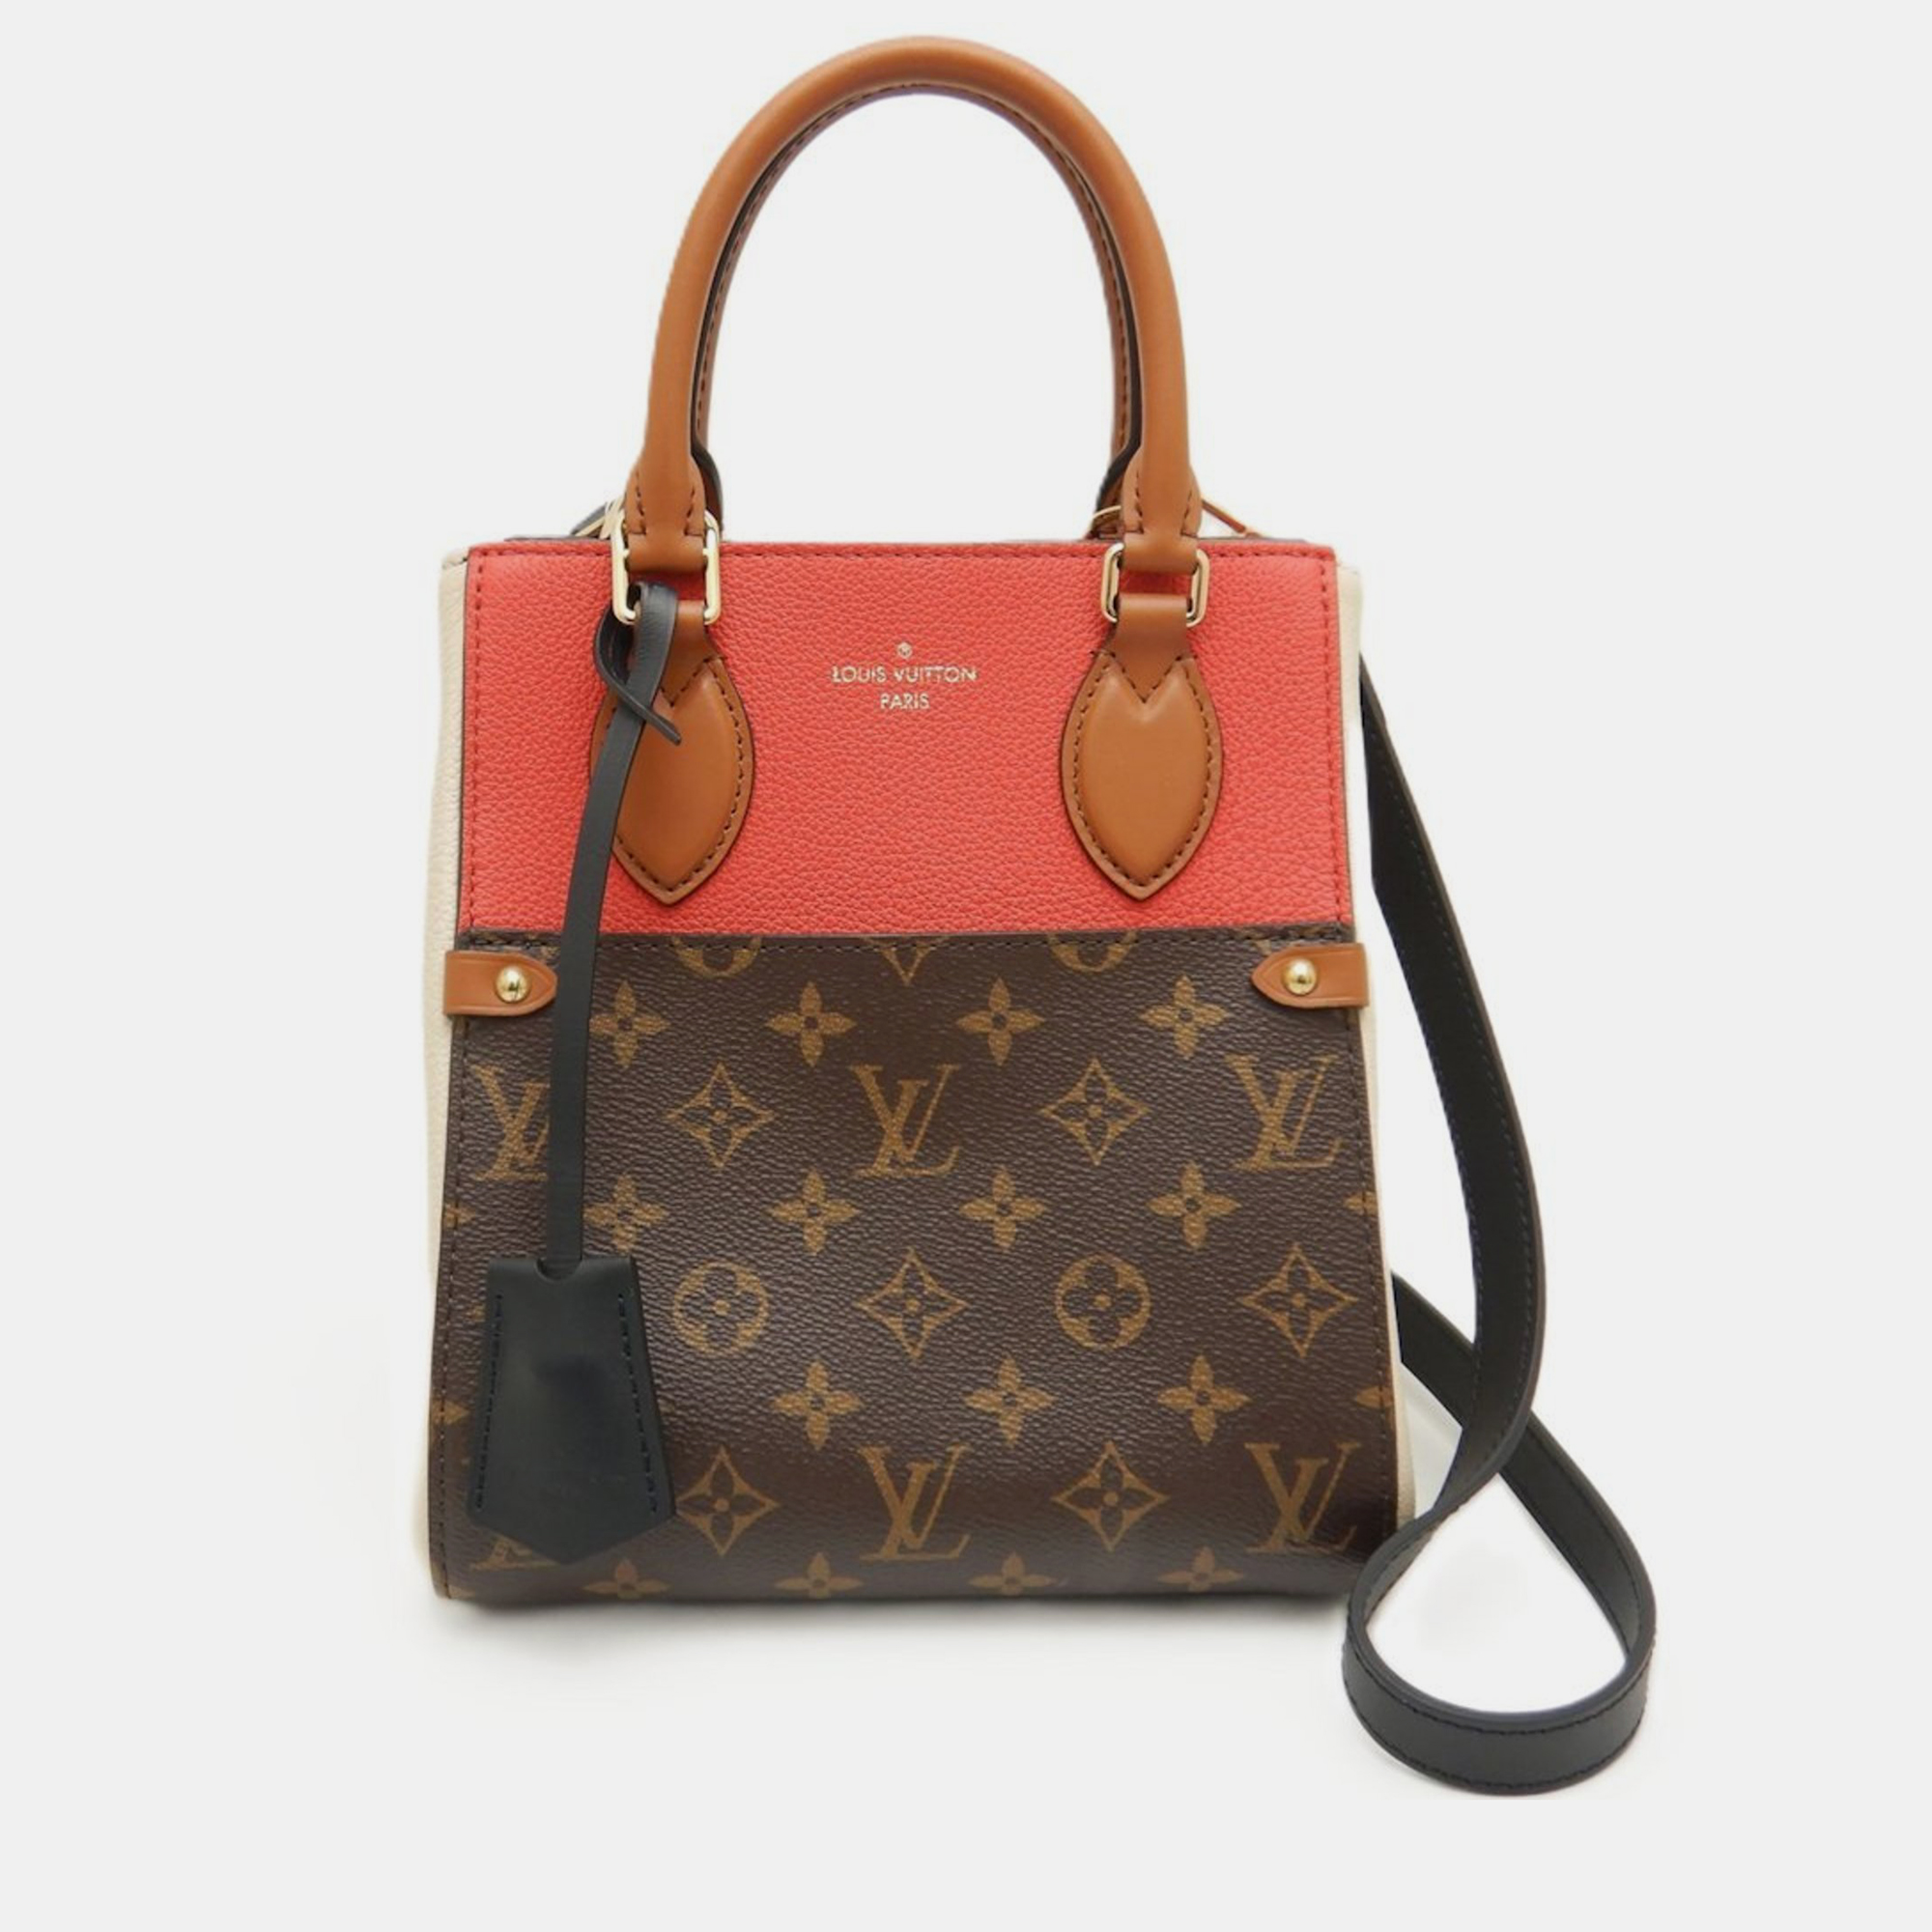 

LOUIS VUITTON Monogram Canvas and Leather PM Fold Tote, Brown